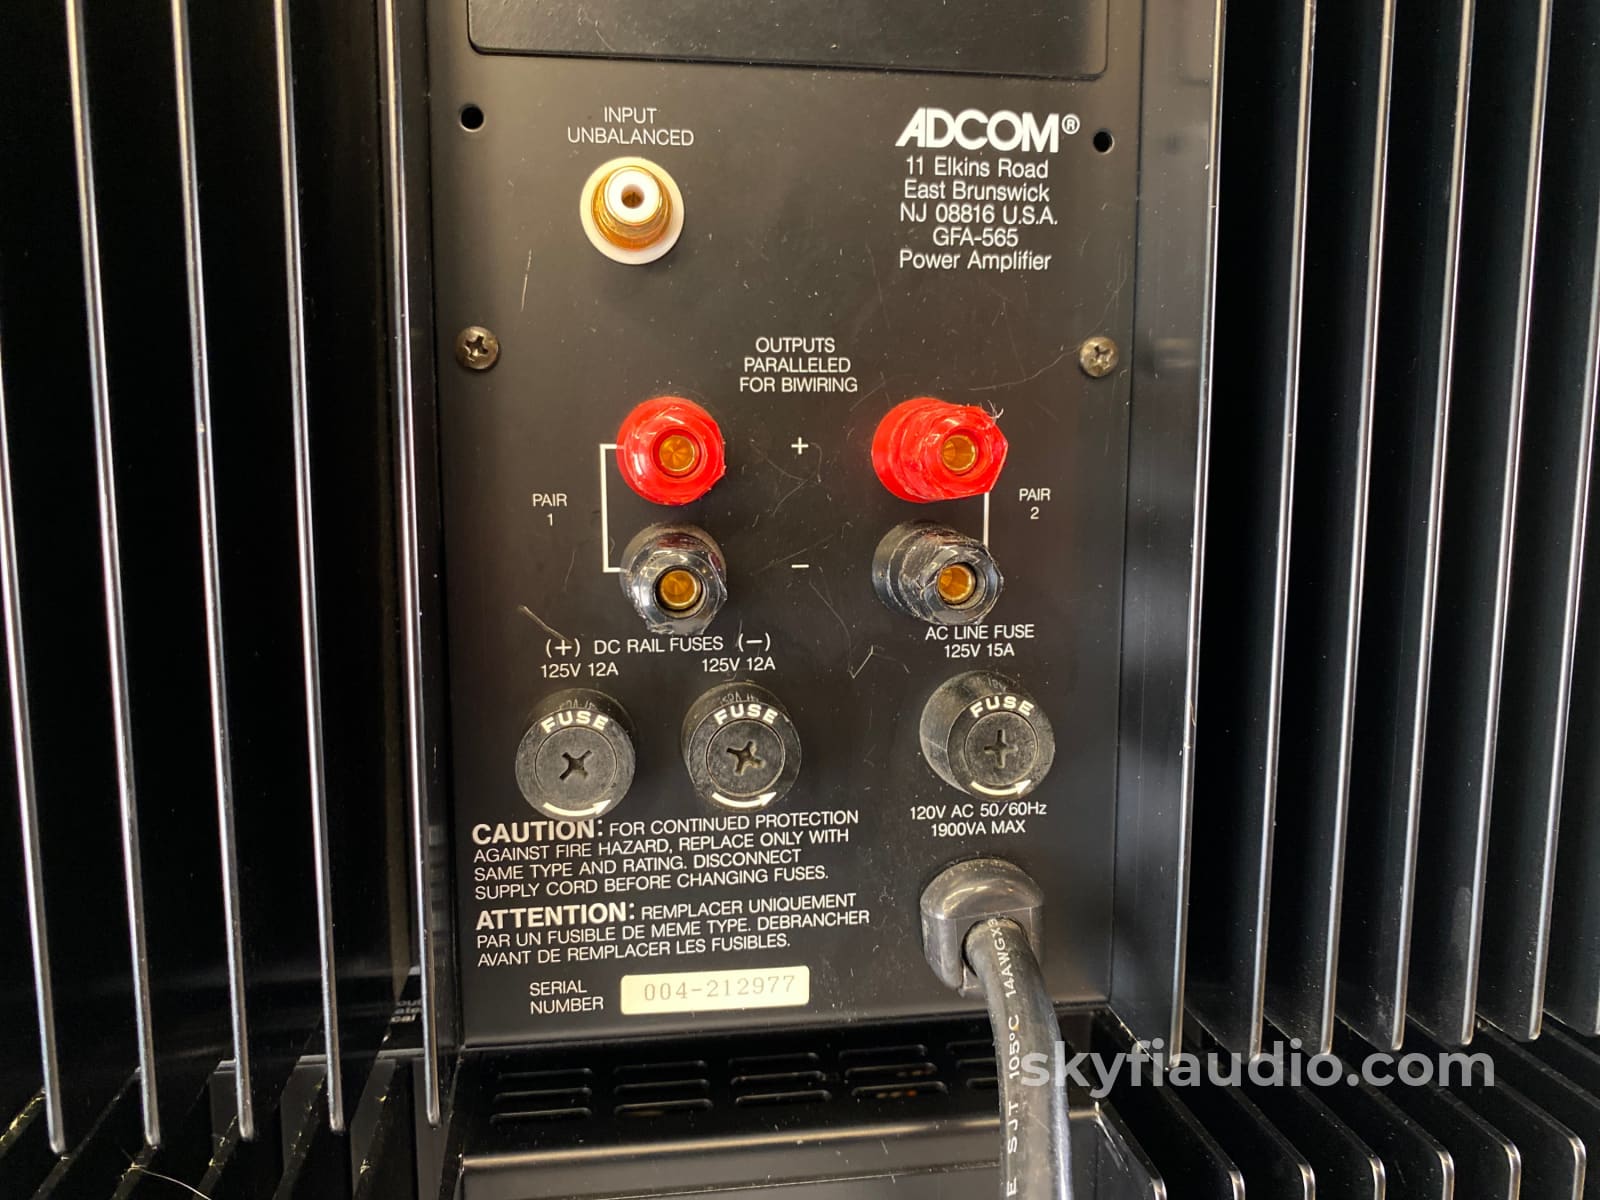 Adcom Gfa-565 Monoblocks - Fully Serviced With New Driver Boards And Original Boxes Amplifier